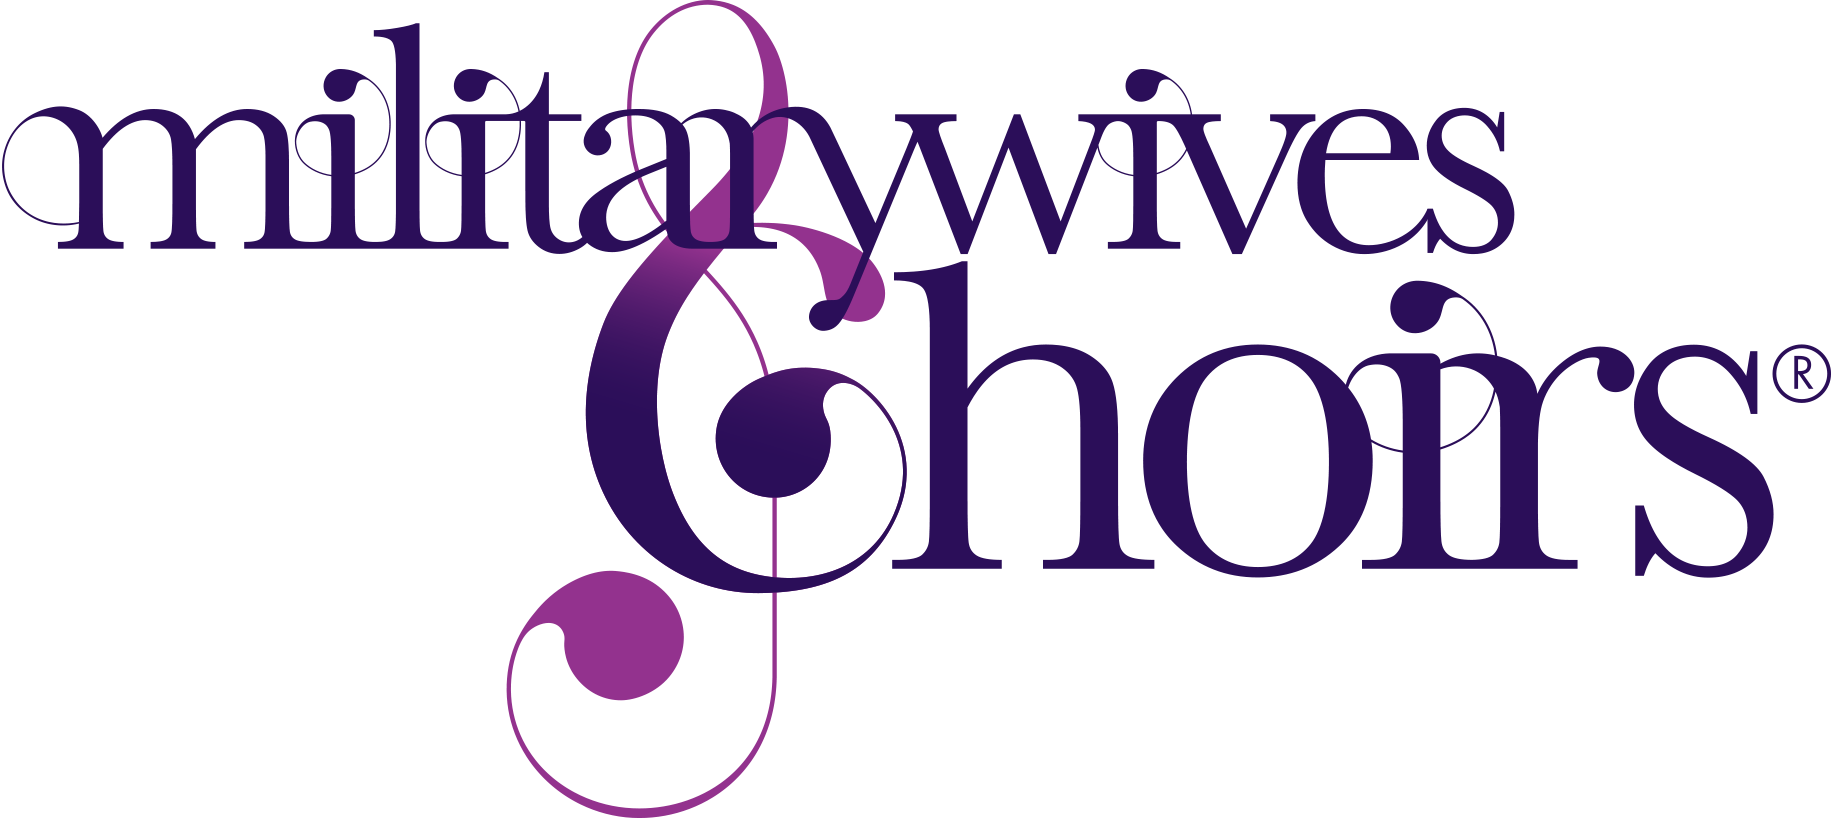 The Military Wives Choirs Foundation